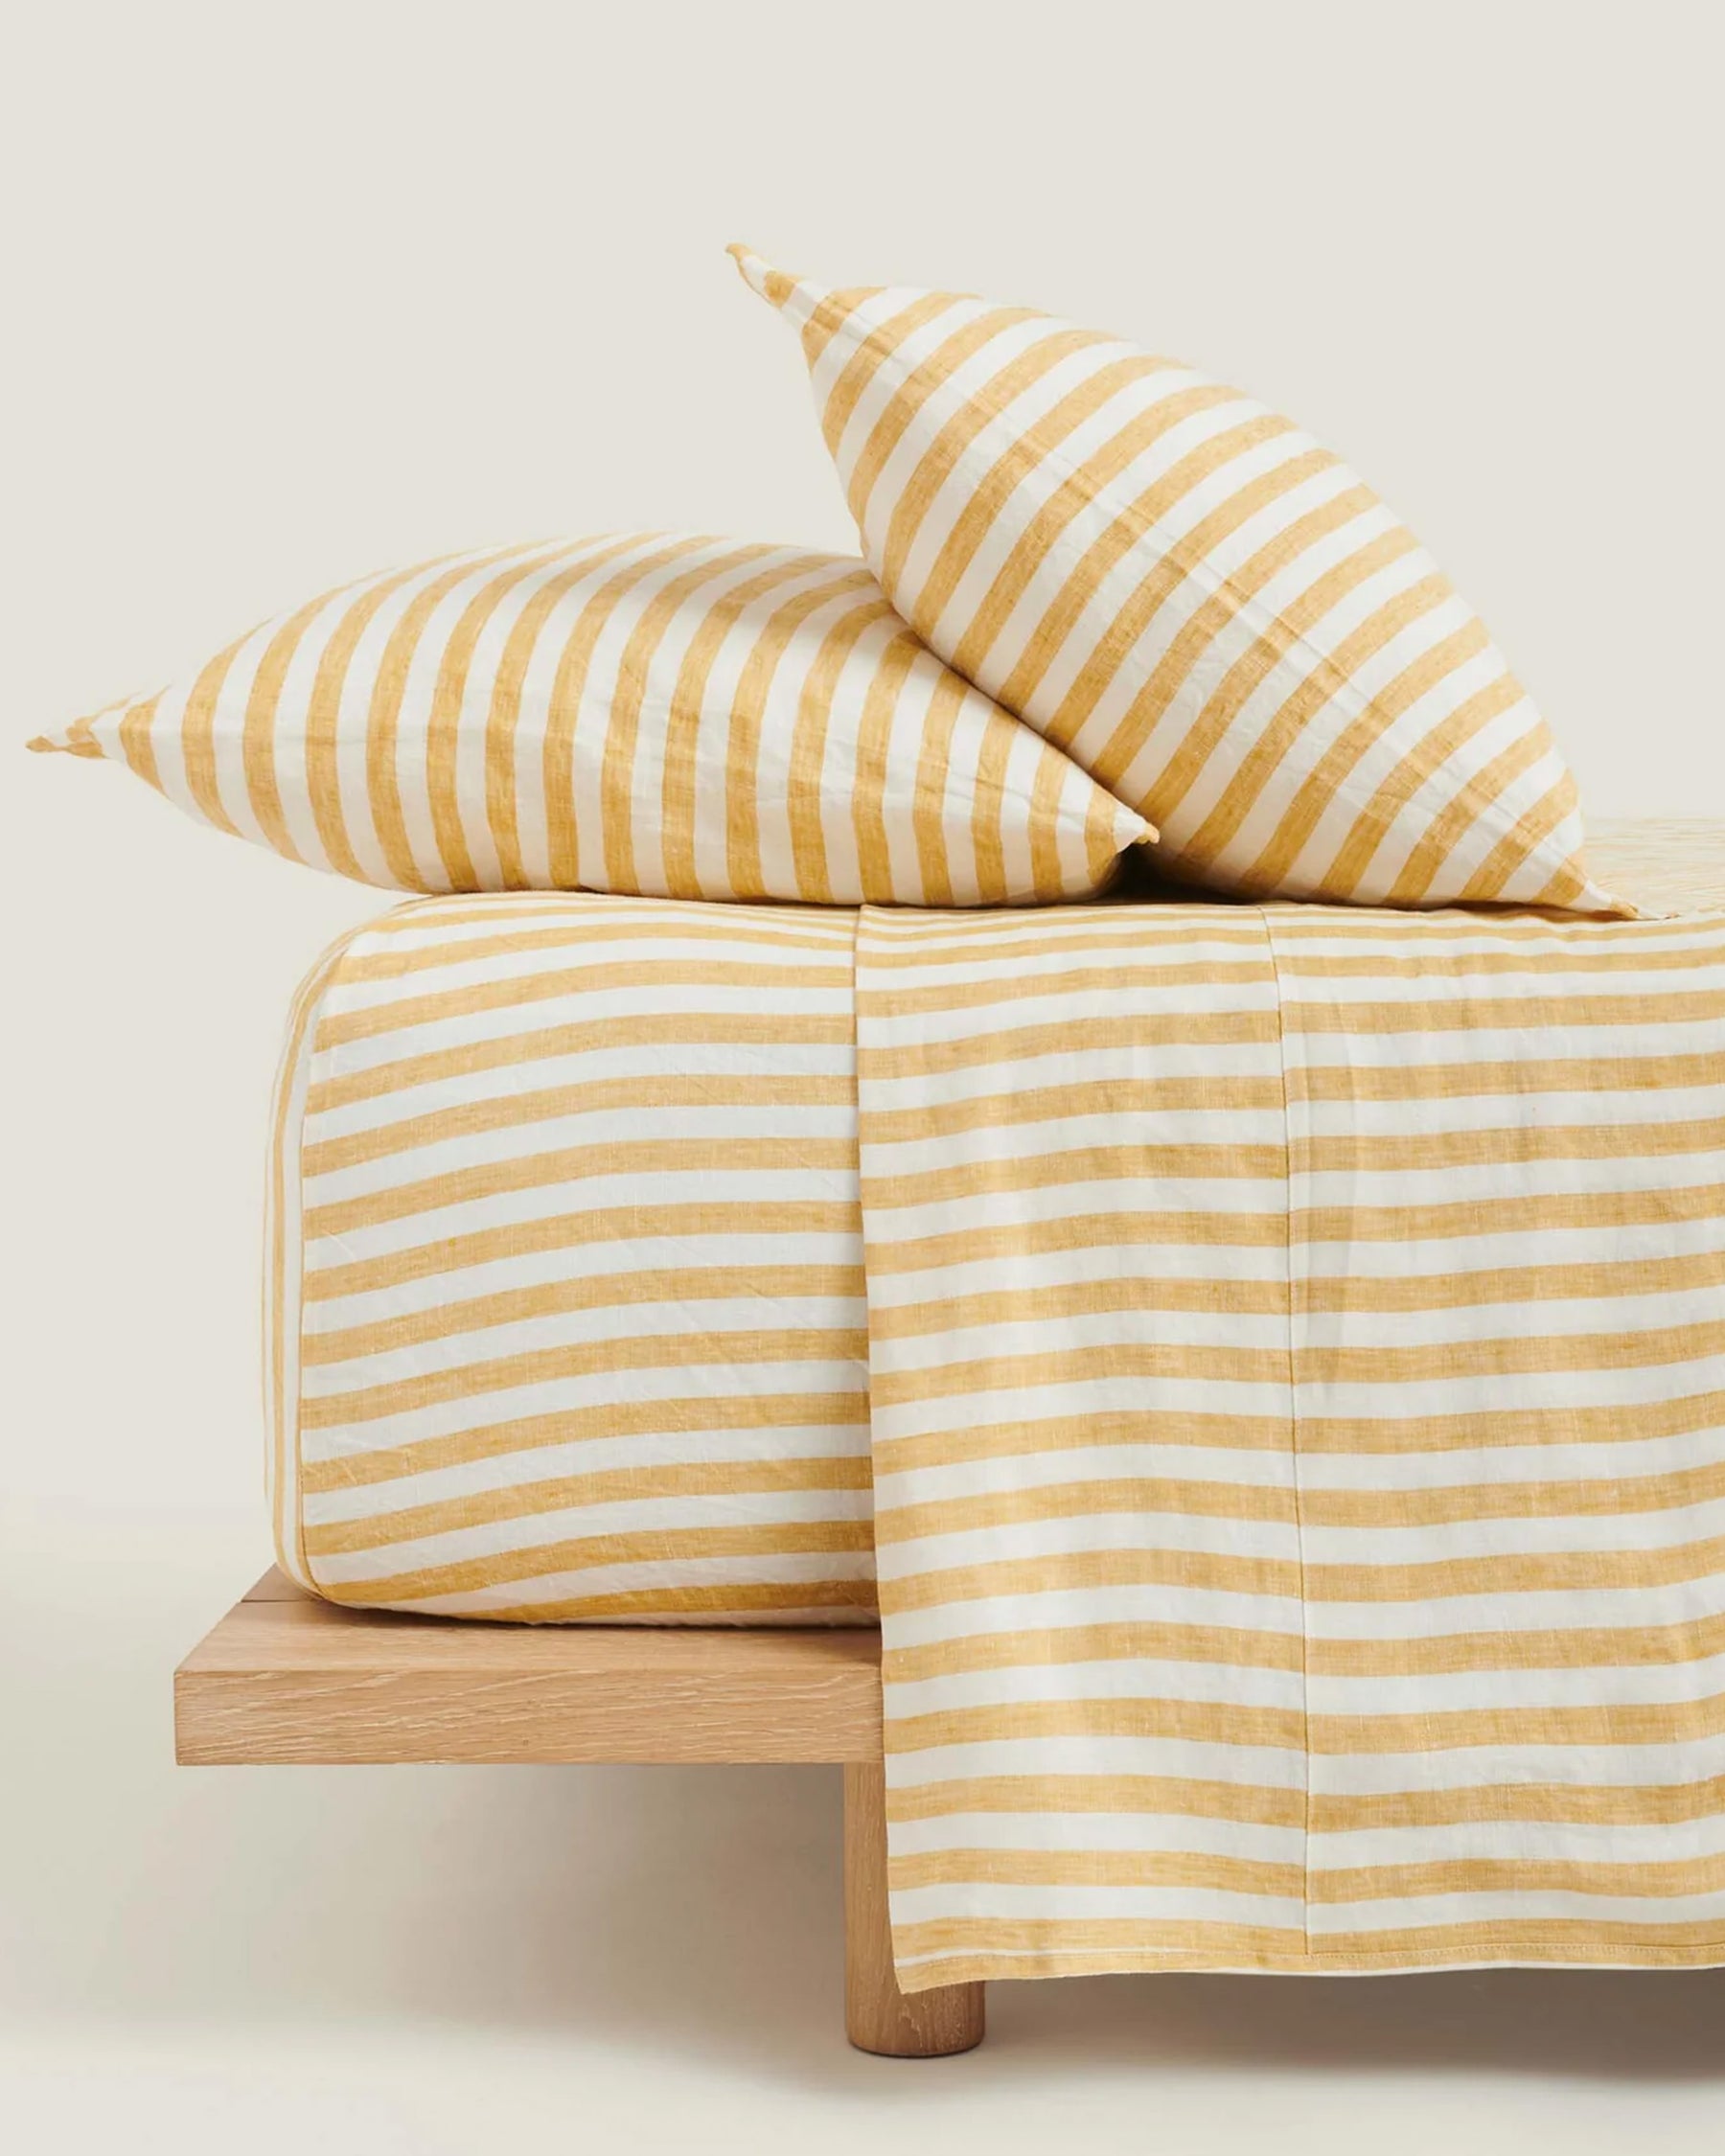 Make your kids bed the comfiest place with this 100% French Linen Fitted Sheet in Wide Natural Stripes. Made from 100% European French flax. Designed to coordinate with Yellow Stripe Flat Sheet and Pillowcase to create a sheet set.